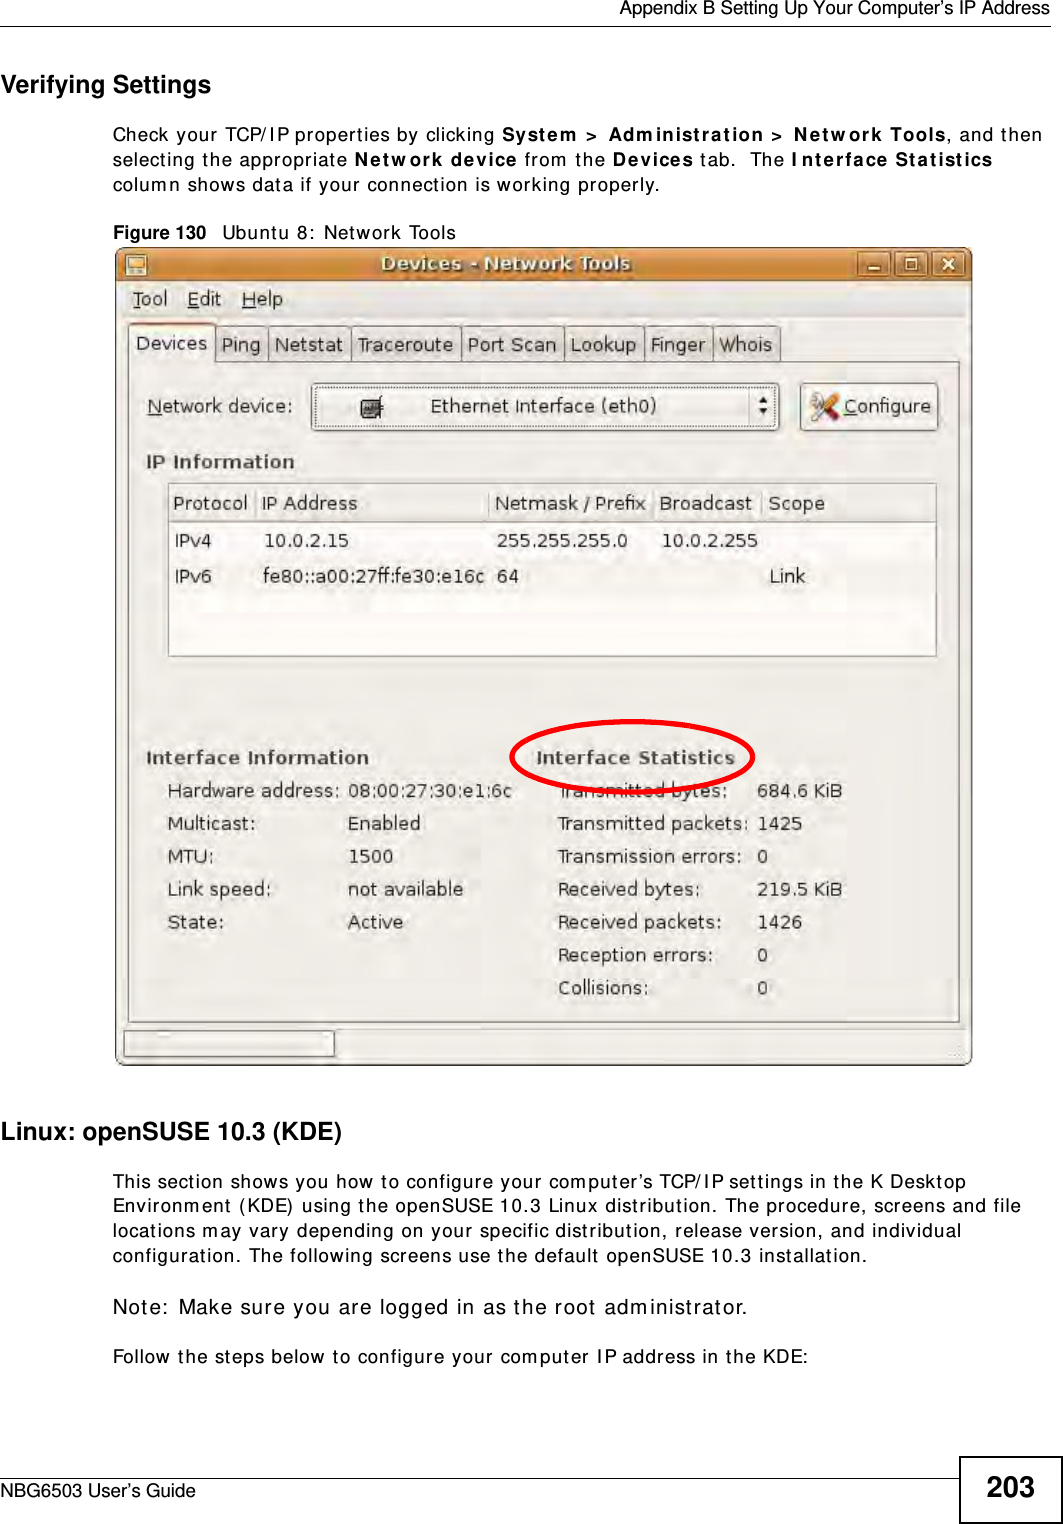  Appendix B Setting Up Your Computer’s IP AddressNBG6503 User’s Guide 203Verifying SettingsCheck your TCP/IP properties by clicking System &gt; Administration &gt; Network Tools, and then selecting the appropriate Network device from the Devices tab.  The Interface Statistics column shows data if your connection is working properly.Figure 130   Ubuntu 8: Network ToolsLinux: openSUSE 10.3 (KDE)This section shows you how to configure your computer’s TCP/IP settings in the K Desktop Environment (KDE) using the openSUSE 10.3 Linux distribution. The procedure, screens and file locations may vary depending on your specific distribution, release version, and individual configuration. The following screens use the default openSUSE 10.3 installation.Note: Make sure you are logged in as the root administrator. Follow the steps below to configure your computer IP address in the KDE: